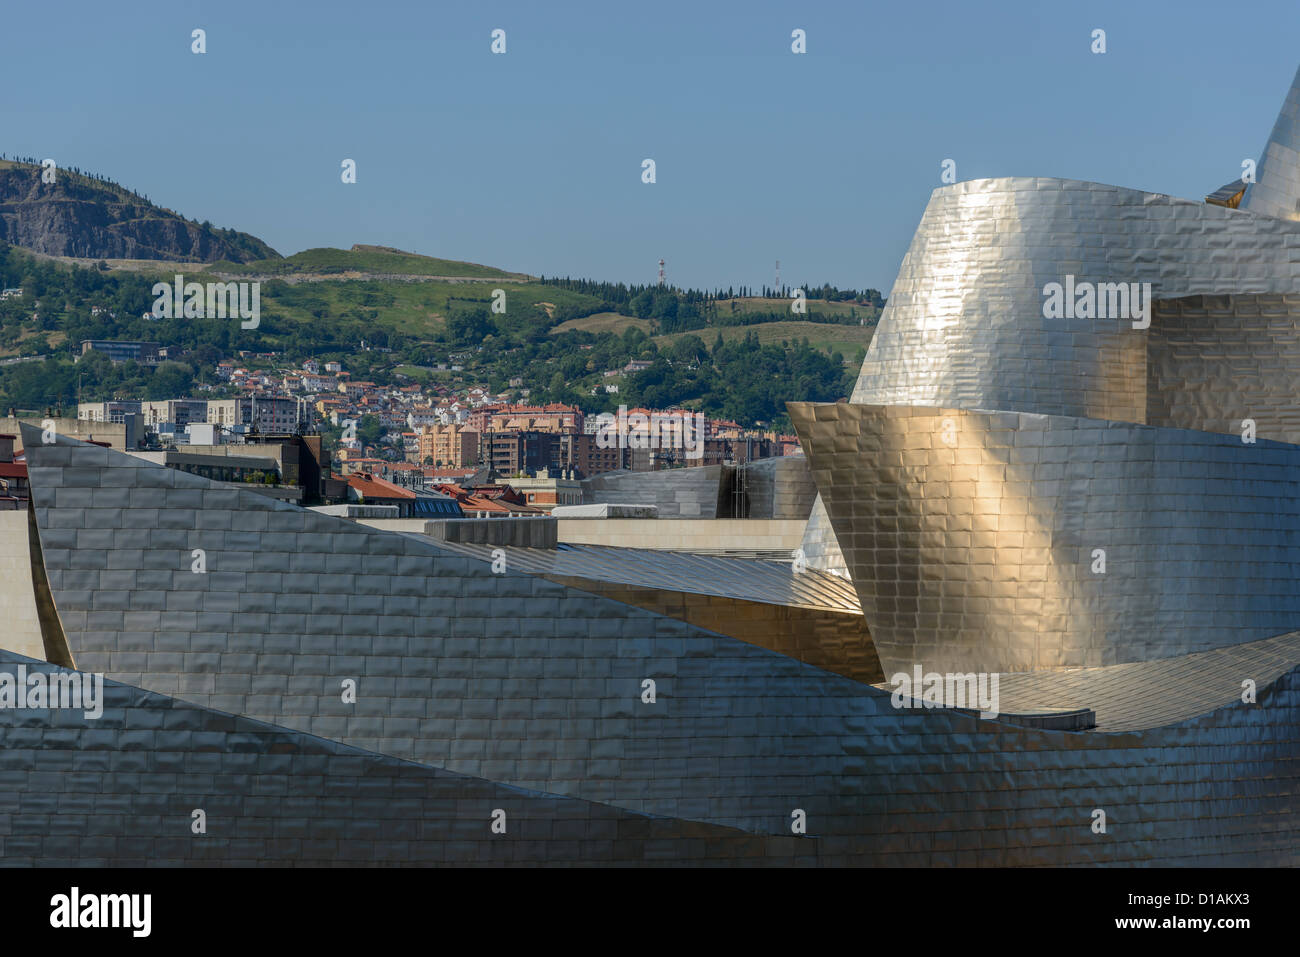 Cutoff of the Guggenheim Bilbao museum, with town in background. Stock Photo